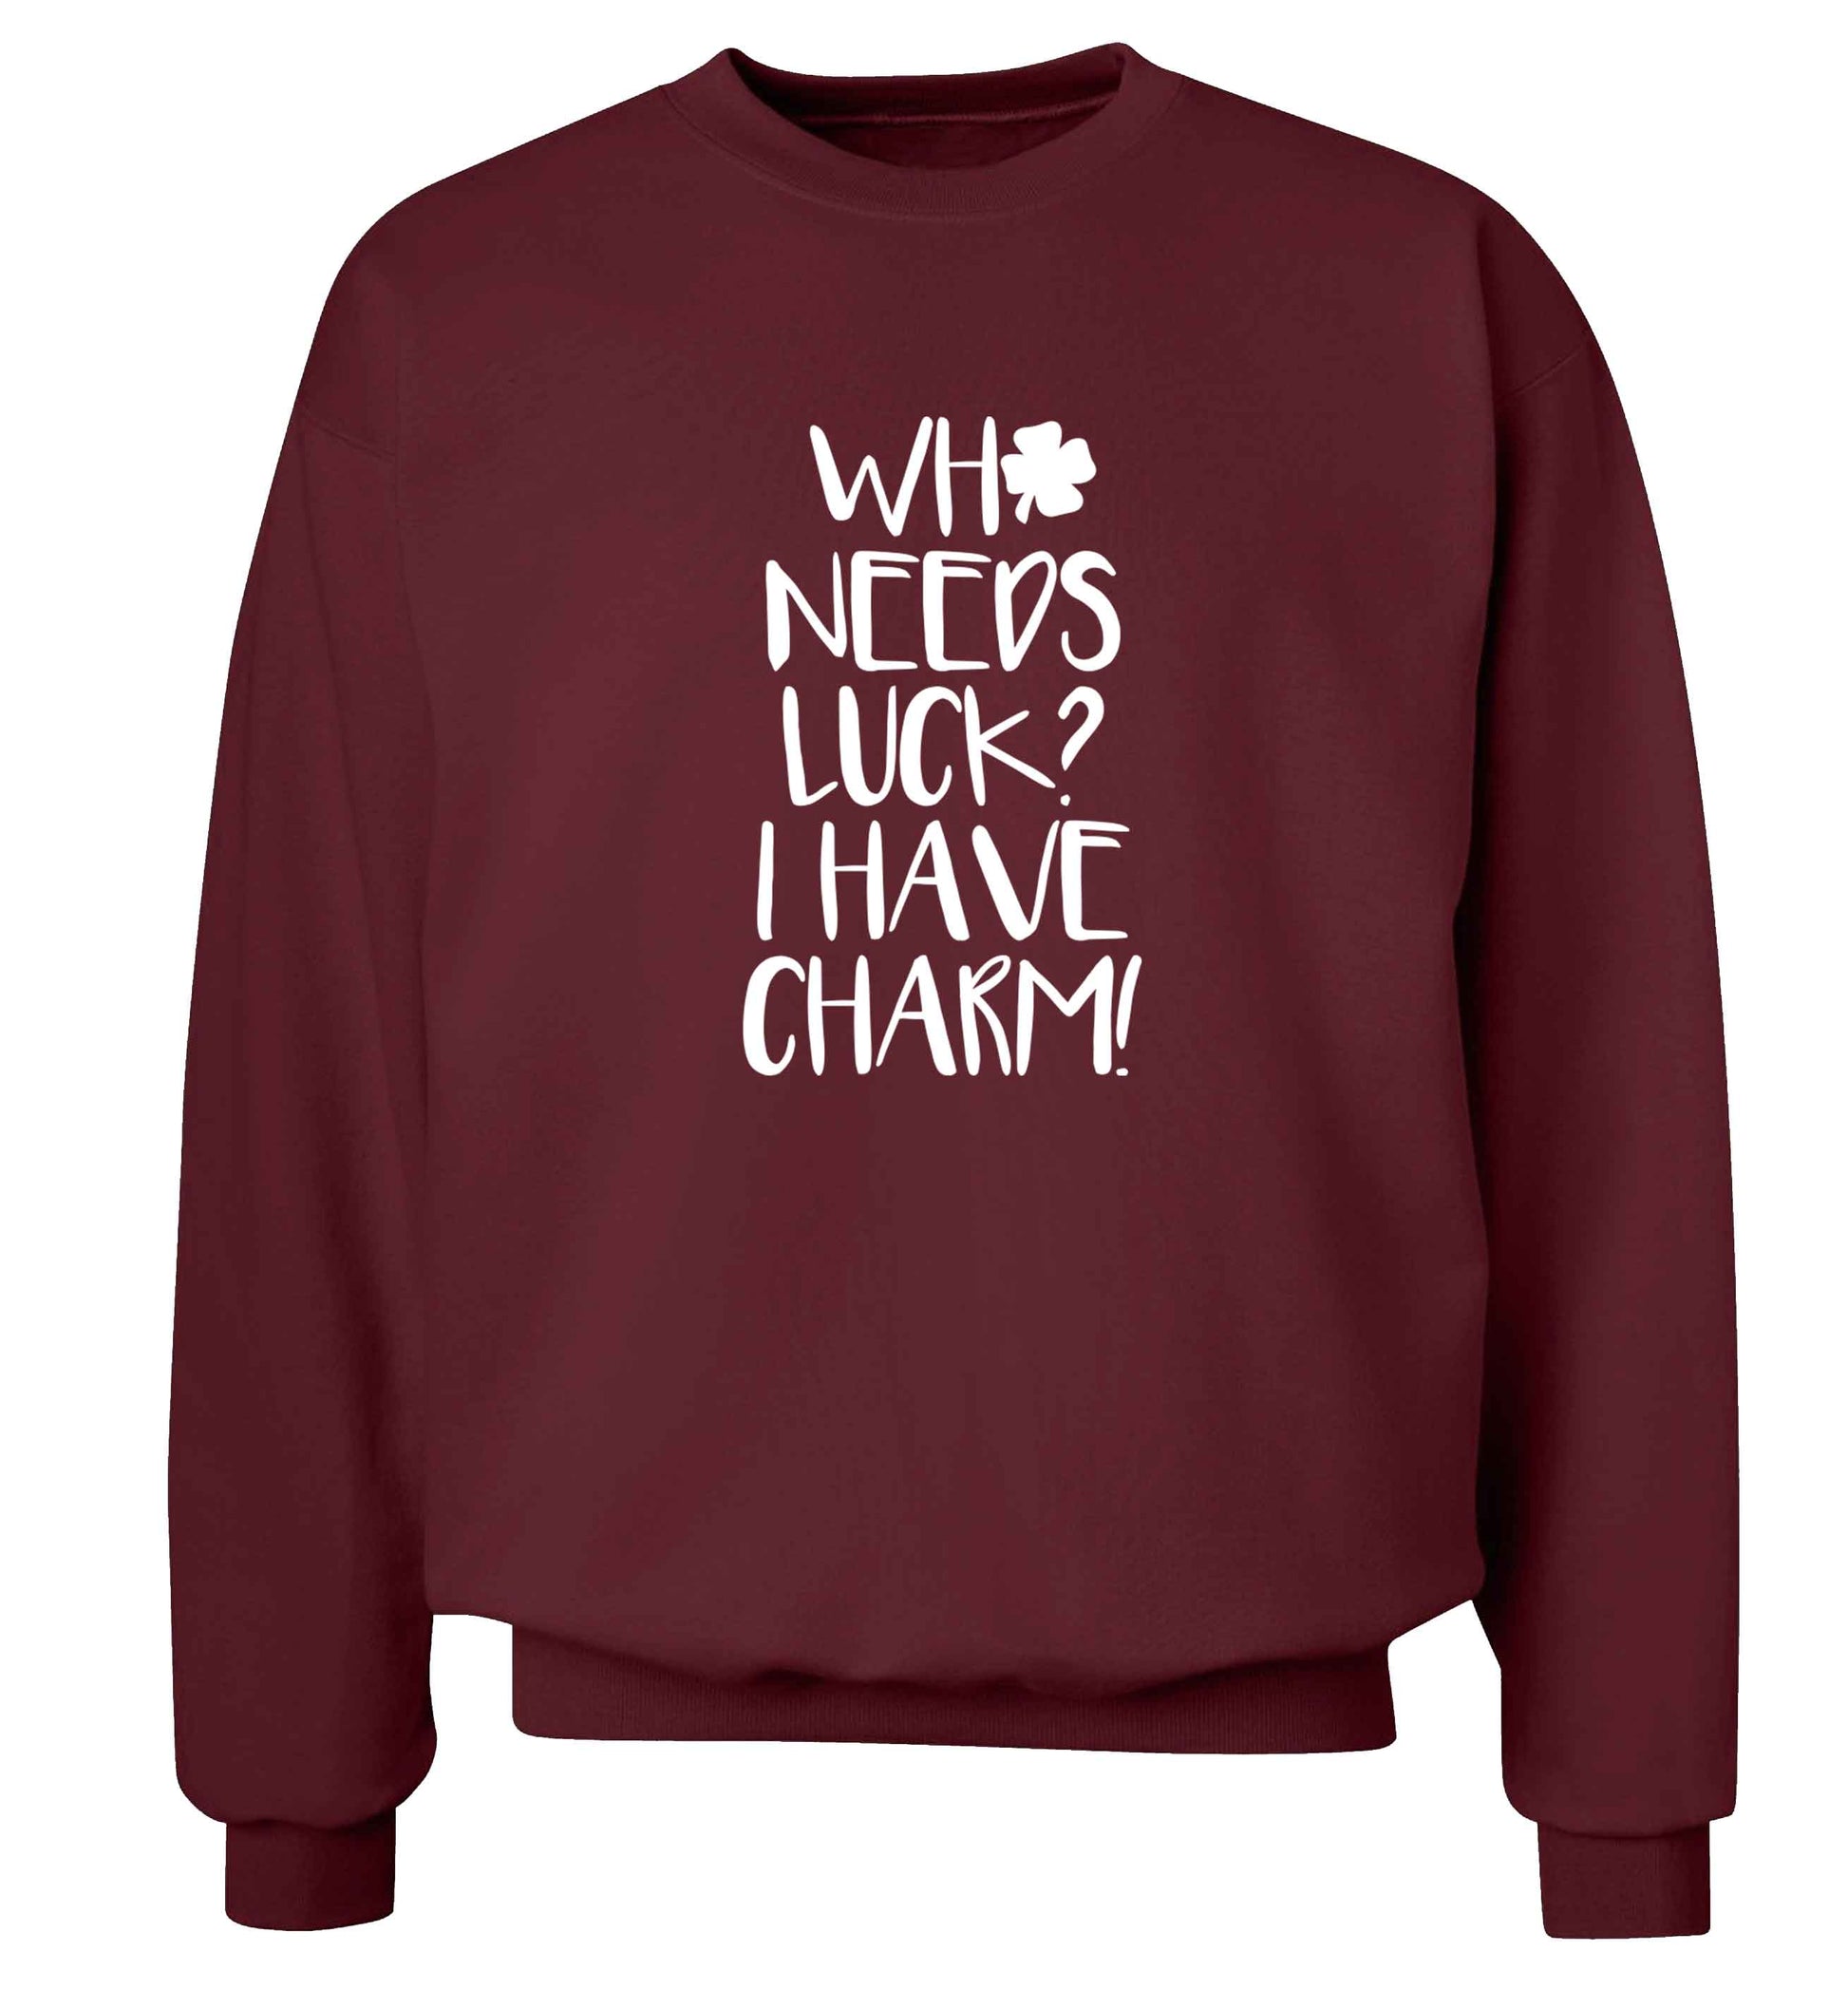 Who needs luck? I have charm! adult's unisex maroon sweater 2XL